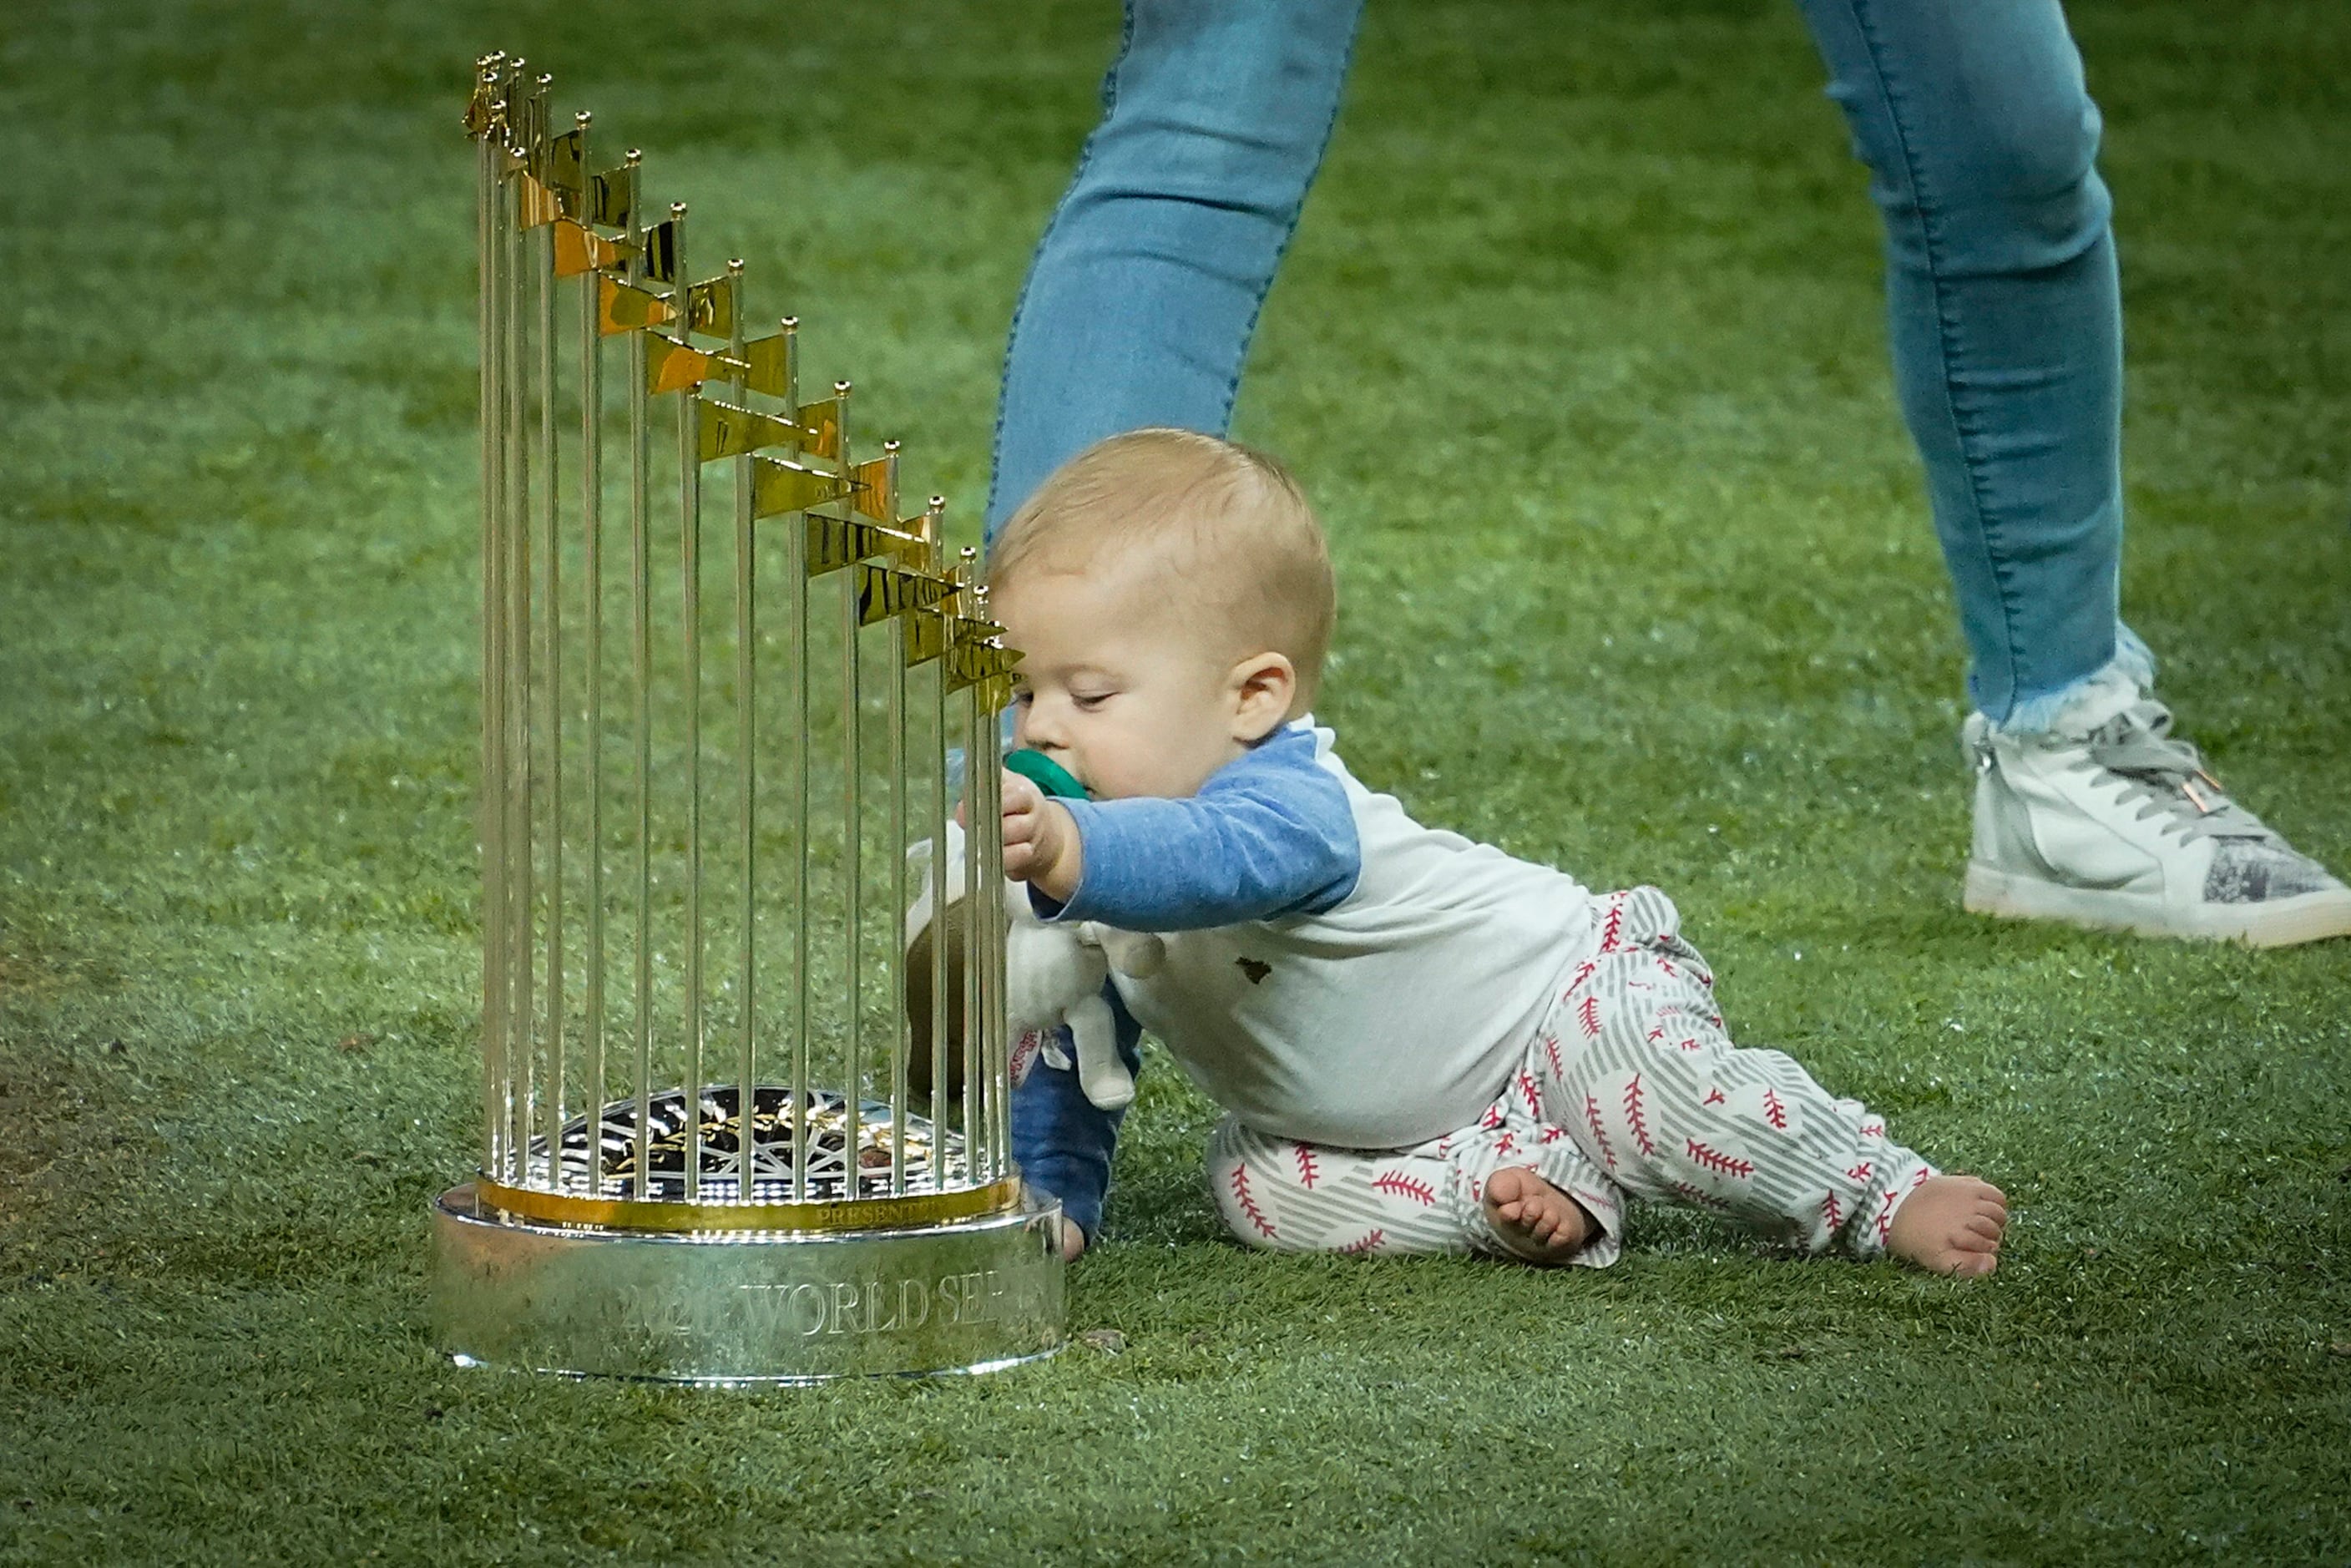 Los Angeles Dodgers starting pitcher Clayton Kershaw’s baby Cooper Ellis Kershaw plays with...